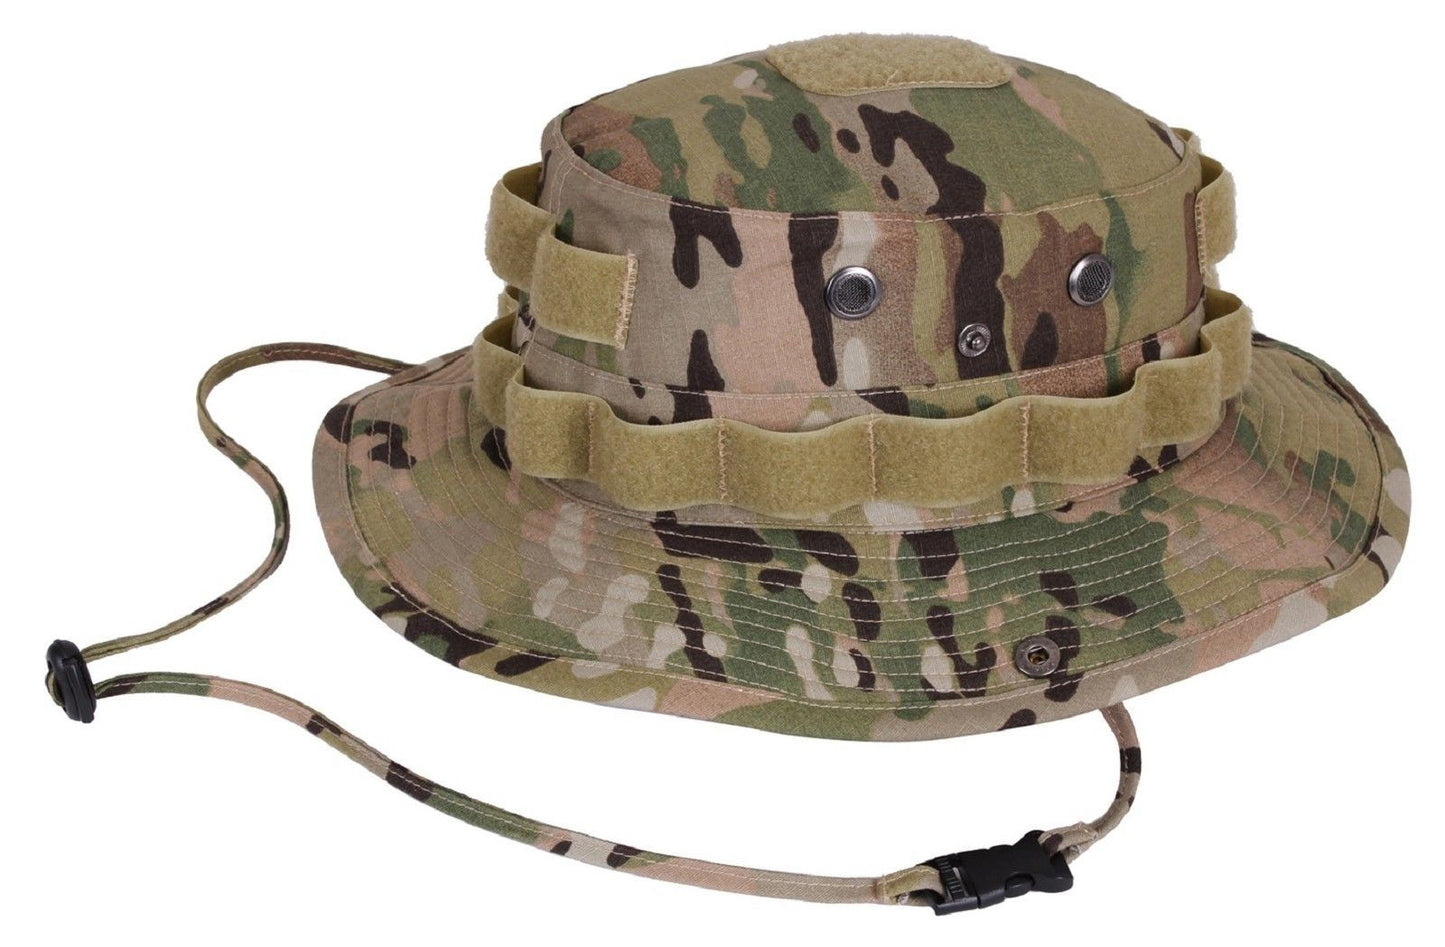 MultiCam Camouflage Adjustable Outdoor Boonie Tactical Bucket Hat Rothco 52552